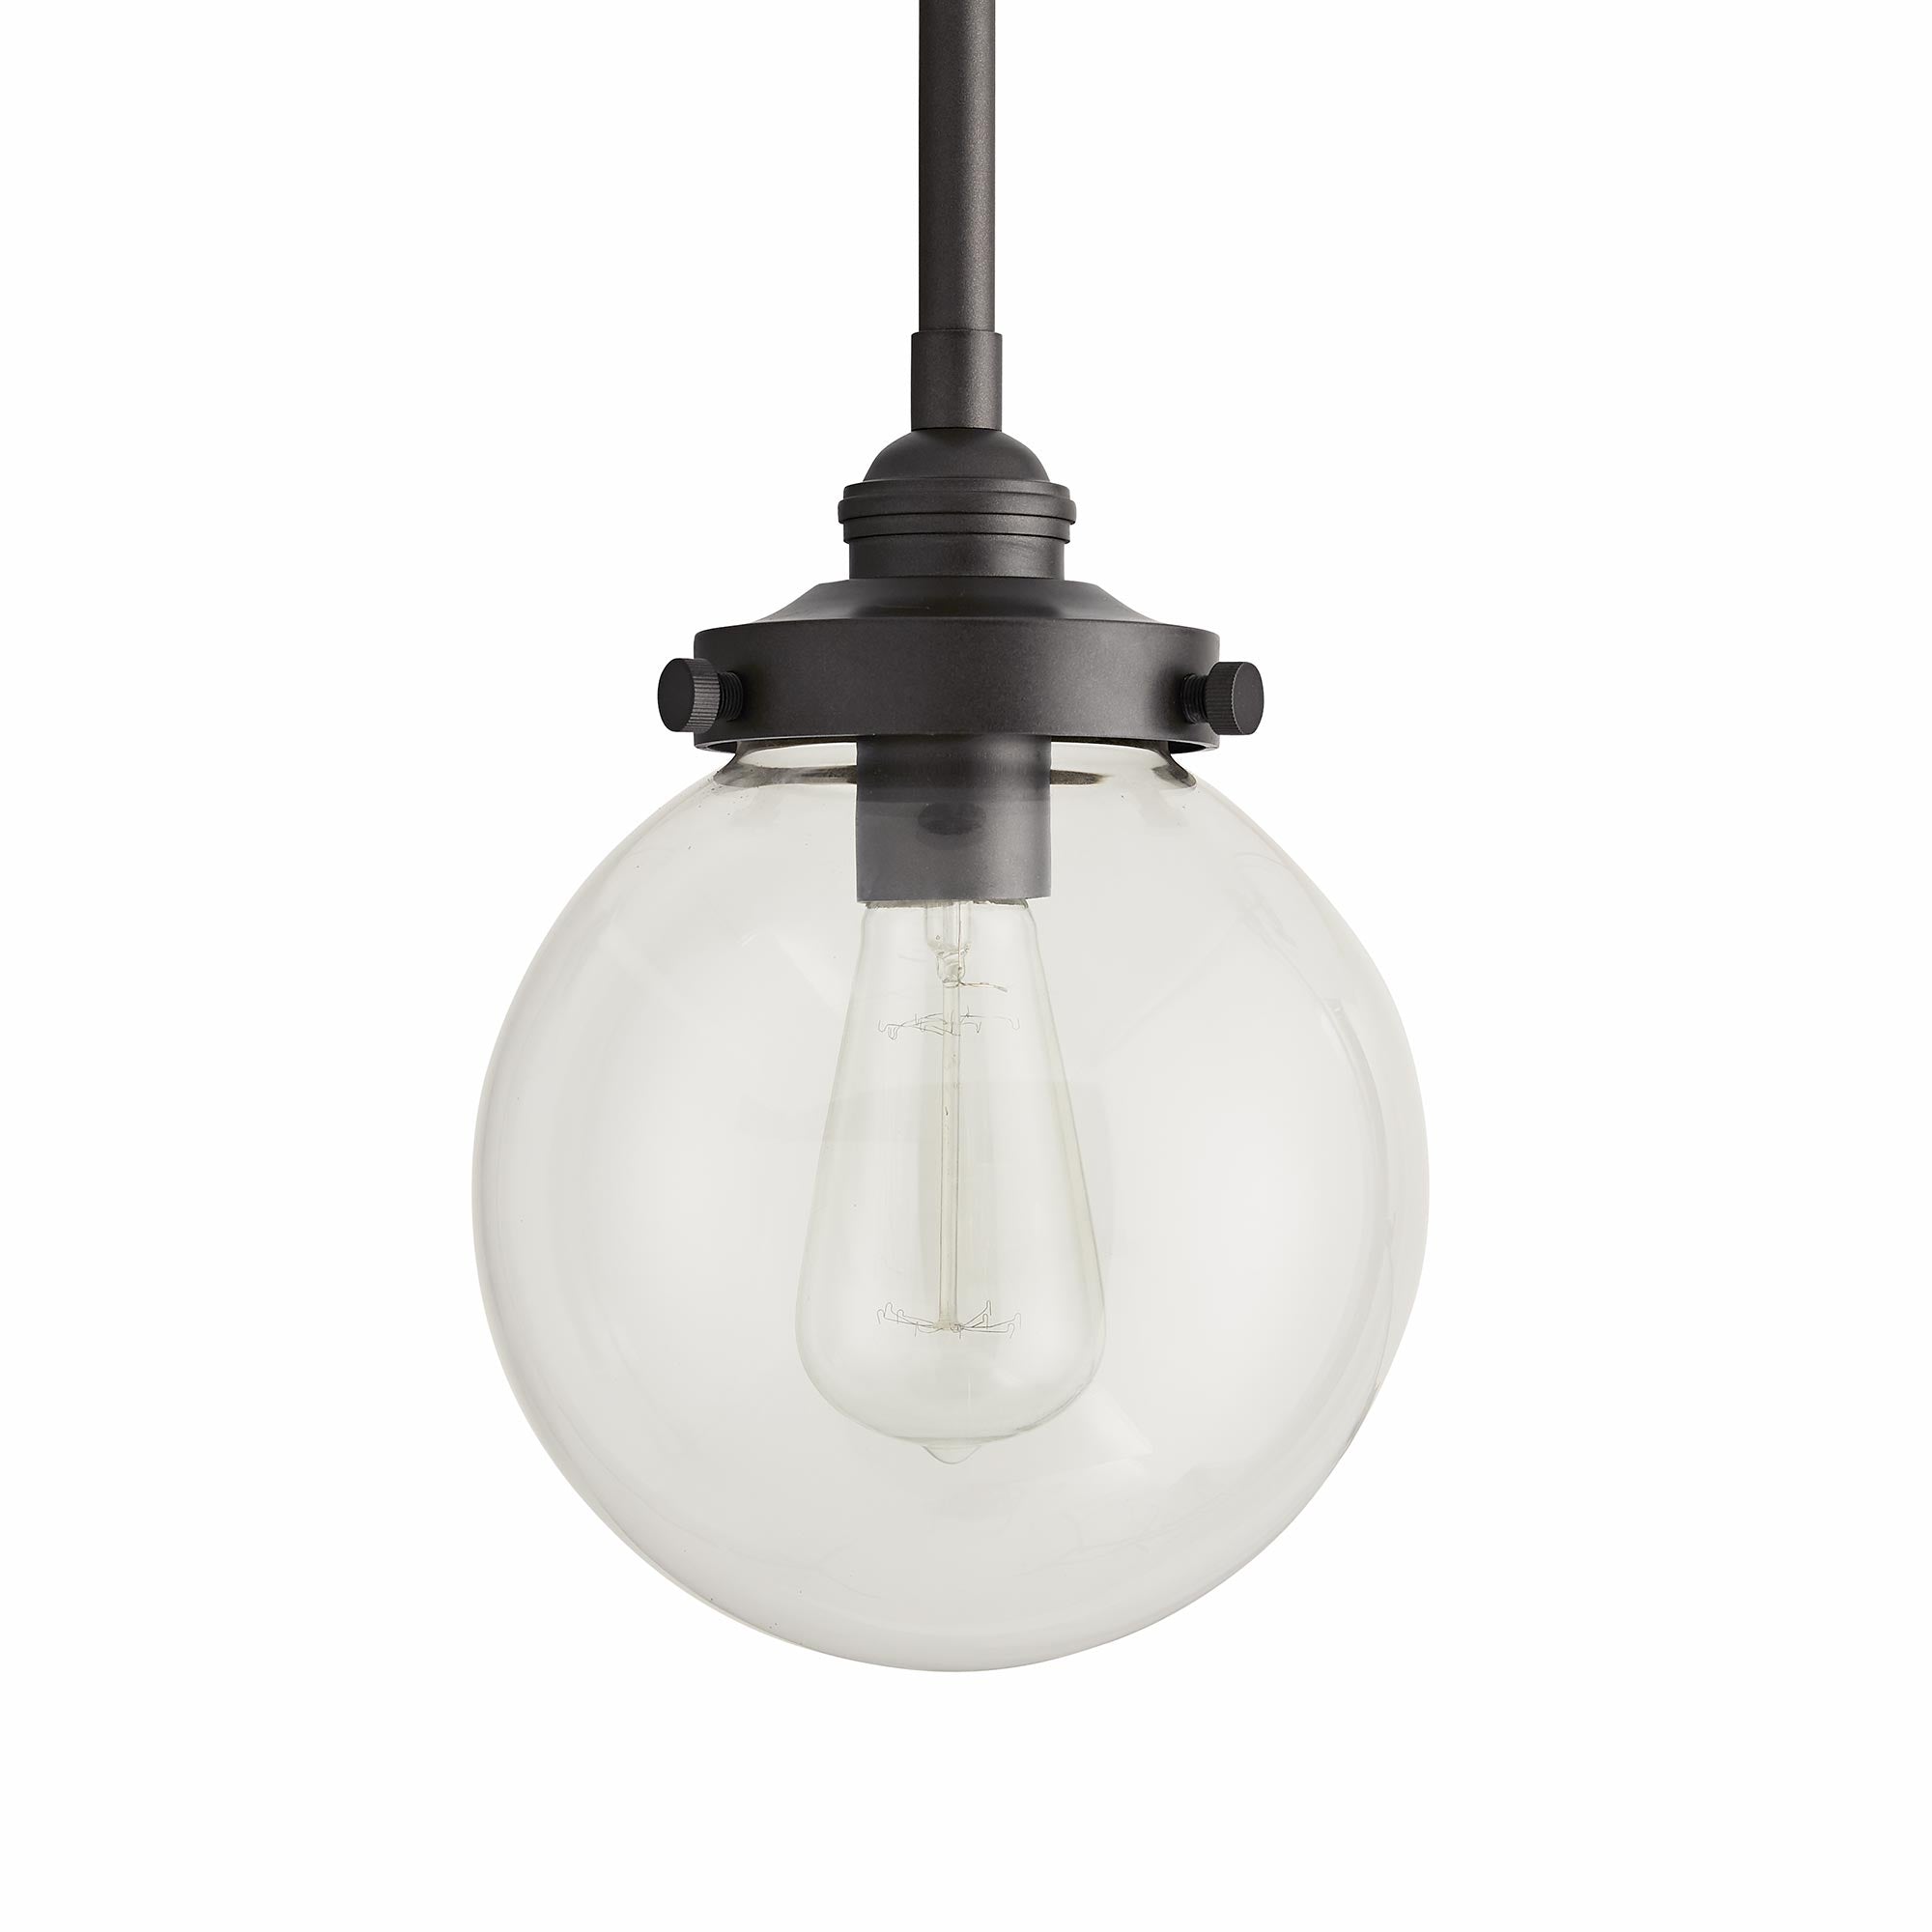 Arteriors Reeves Small Outdoor Pendant 49210